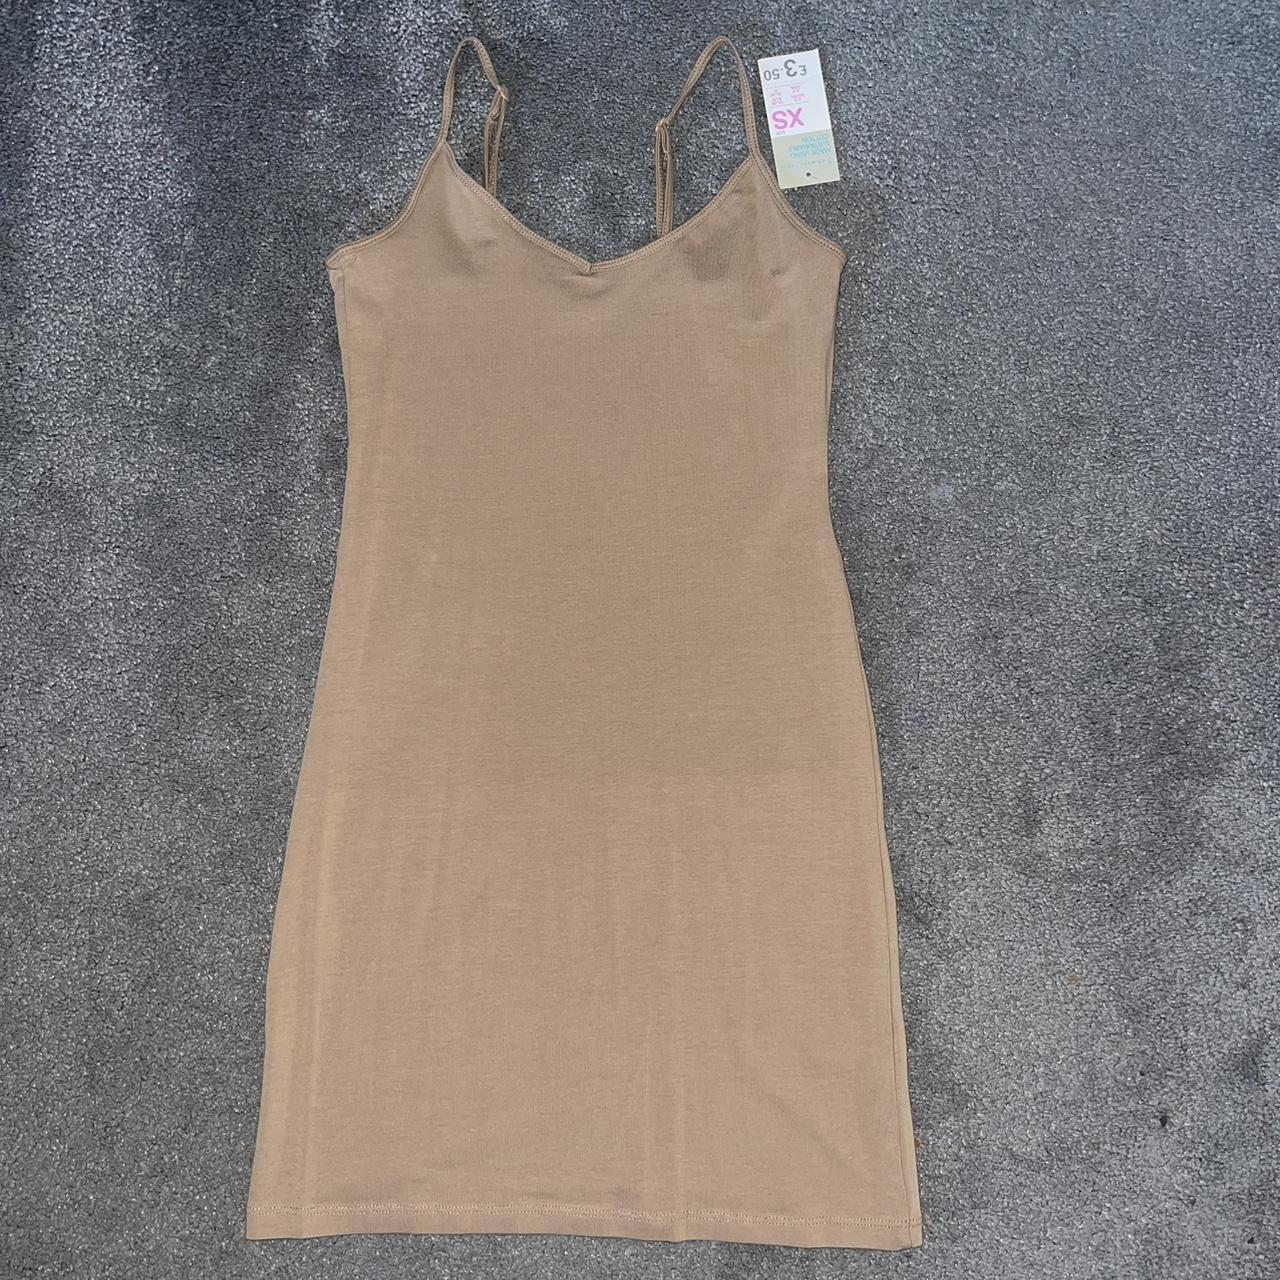 brown primark dress new with tags size XS - Depop